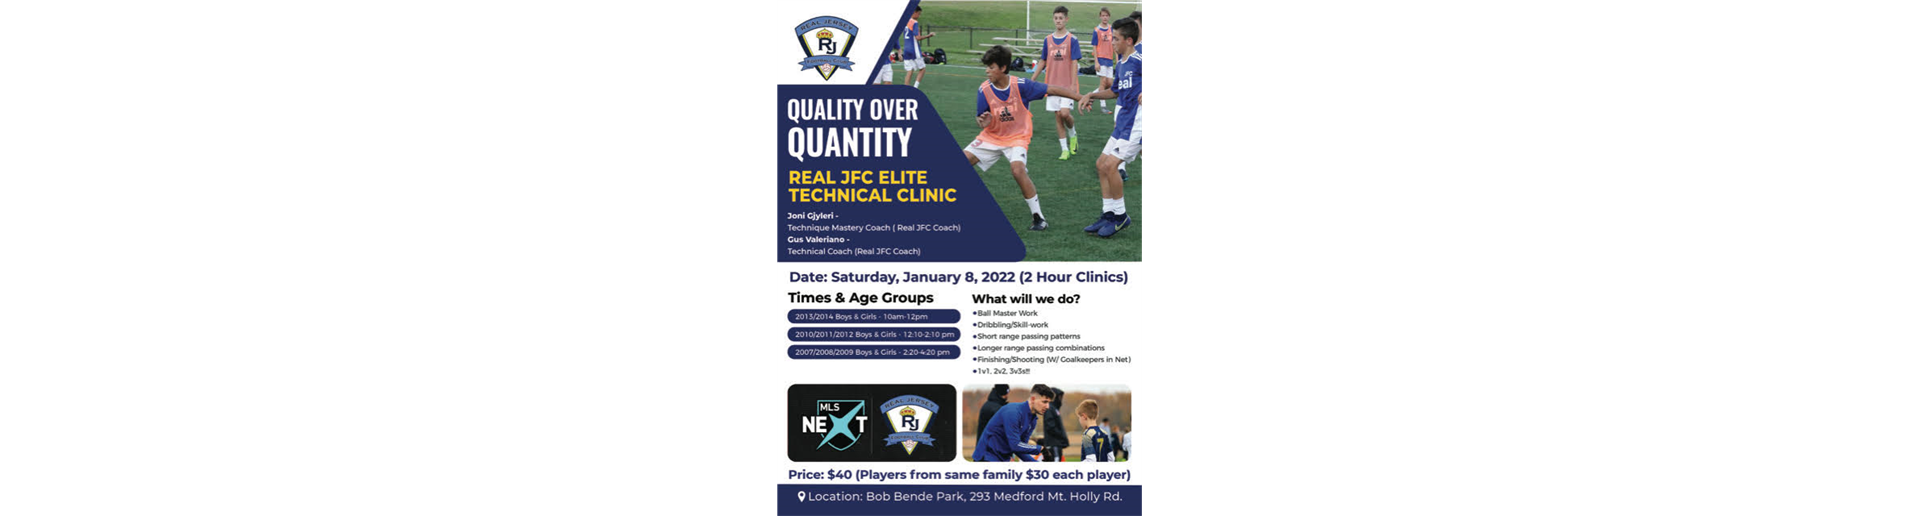 Real JFC Elite Technical Clinic